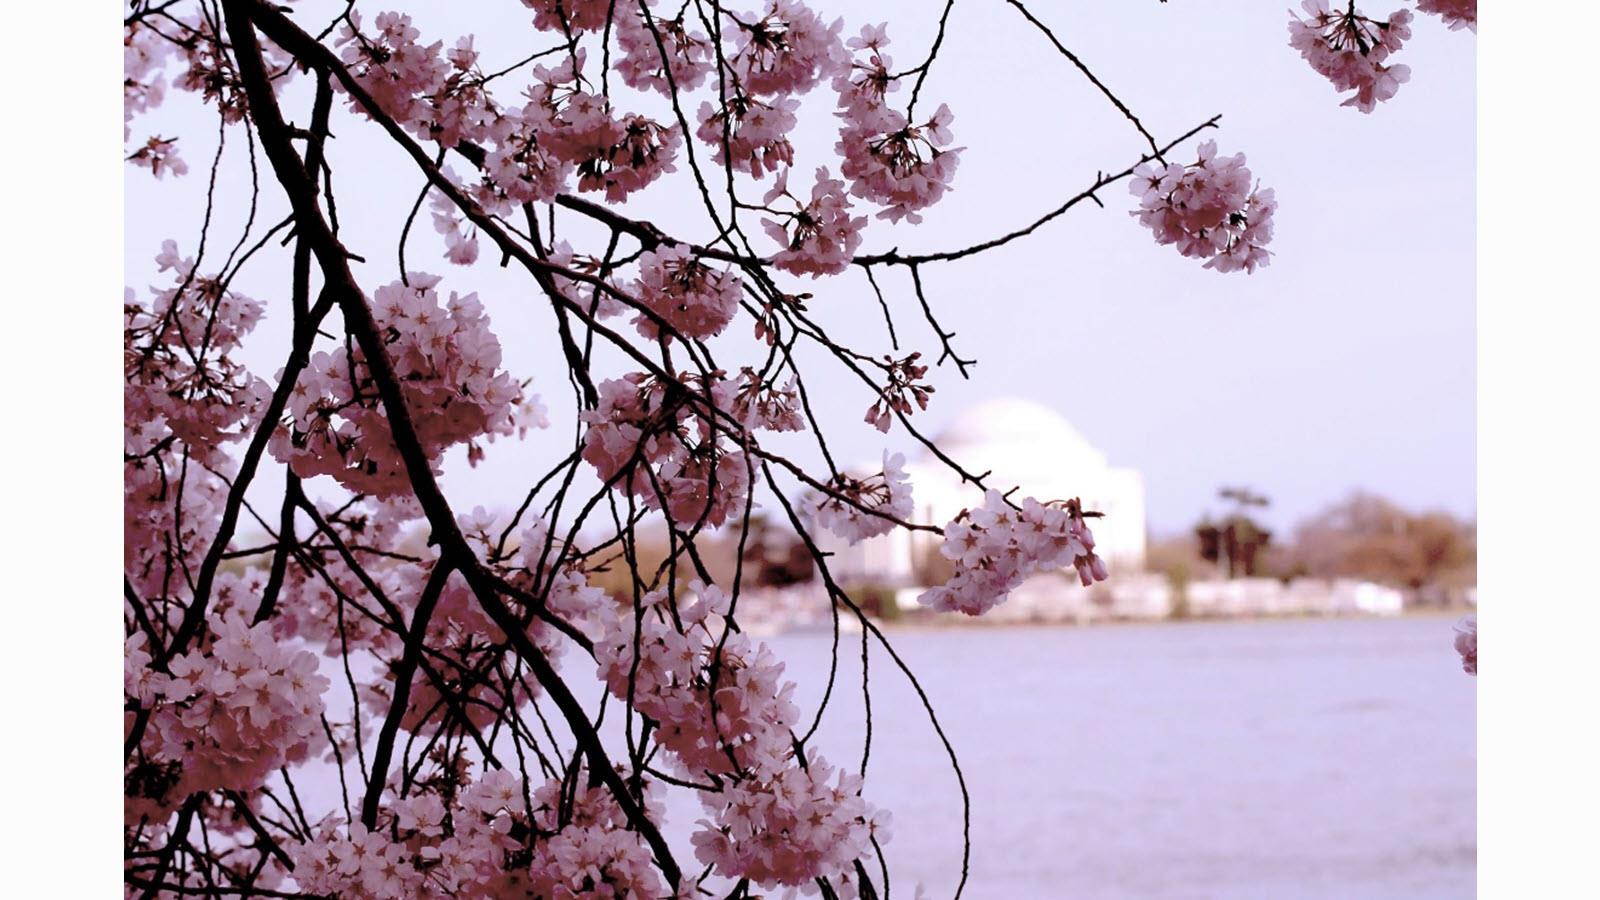 Branch of pink cherry blossoms in Washington, D.C.